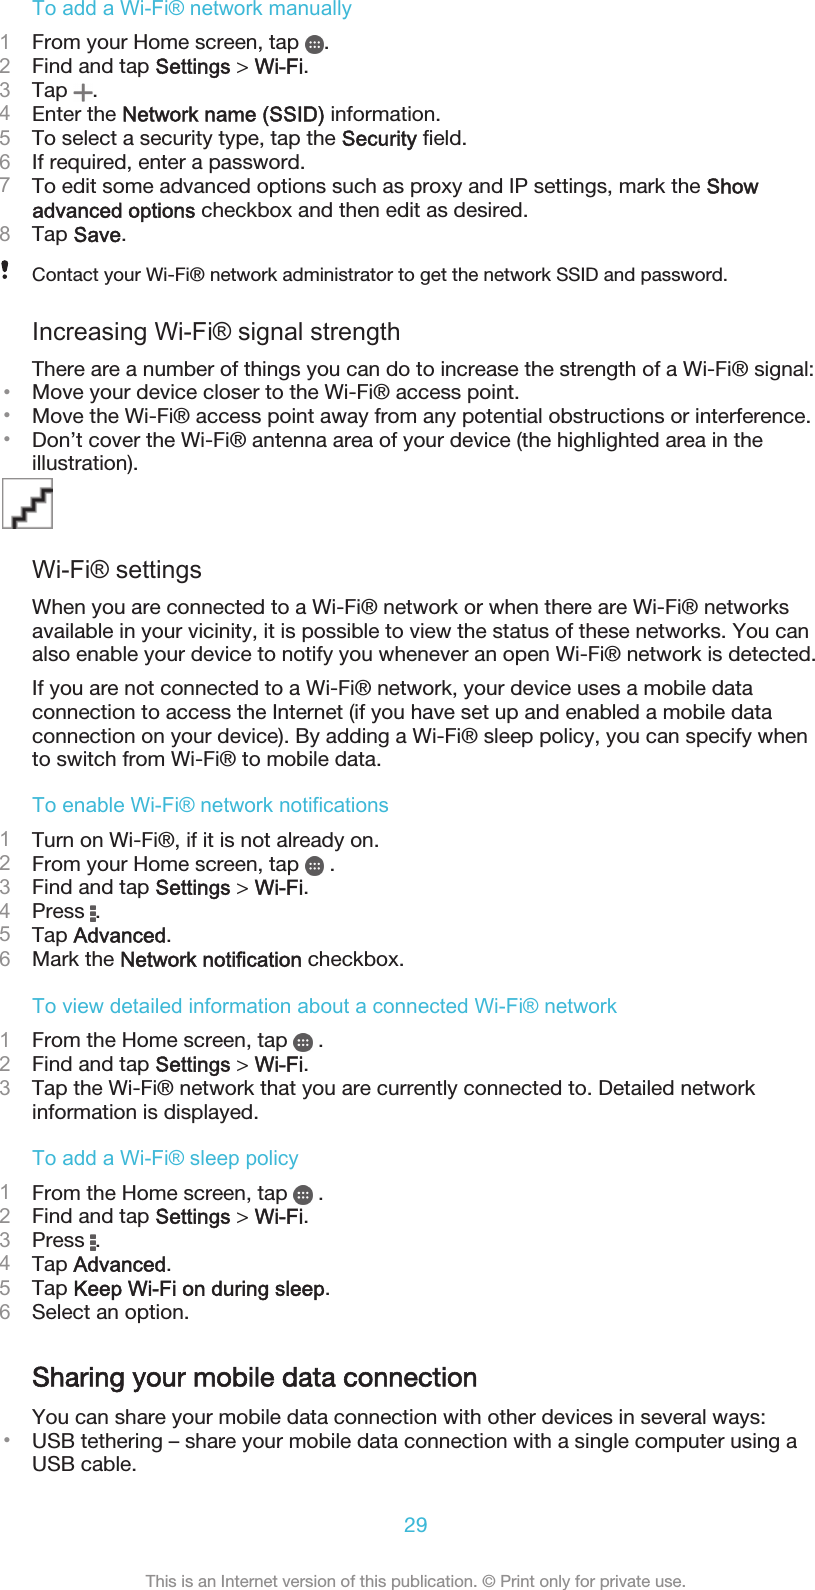 To add a Wi-Fi® network manually1From your Home screen, tap  .2Find and tap Settings &gt; Wi-Fi.3Tap  .4Enter the Network name (SSID) information.5To select a security type, tap the Security field.6If required, enter a password.7To edit some advanced options such as proxy and IP settings, mark the Showadvanced options checkbox and then edit as desired.8Tap Save.Contact your Wi-Fi® network administrator to get the network SSID and password.Increasing Wi-Fi® signal strengthThere are a number of things you can do to increase the strength of a Wi-Fi® signal:•Move your device closer to the Wi-Fi® access point.•Move the Wi-Fi® access point away from any potential obstructions or interference.•Don’t cover the Wi-Fi® antenna area of your device (the highlighted area in theillustration).Wi-Fi® settingsWhen you are connected to a Wi-Fi® network or when there are Wi-Fi® networksavailable in your vicinity, it is possible to view the status of these networks. You canalso enable your device to notify you whenever an open Wi-Fi® network is detected.If you are not connected to a Wi-Fi® network, your device uses a mobile dataconnection to access the Internet (if you have set up and enabled a mobile dataconnection on your device). By adding a Wi-Fi® sleep policy, you can specify whento switch from Wi-Fi® to mobile data.To enable Wi-Fi® network notifications1Turn on Wi-Fi®, if it is not already on.2From your Home screen, tap   .3Find and tap Settings &gt; Wi-Fi.4Press  .5Tap Advanced.6Mark the Network notification checkbox.To view detailed information about a connected Wi-Fi® network1From the Home screen, tap   .2Find and tap Settings &gt; Wi-Fi.3Tap the Wi-Fi® network that you are currently connected to. Detailed networkinformation is displayed.To add a Wi-Fi® sleep policy1From the Home screen, tap   .2Find and tap Settings &gt; Wi-Fi.3Press  .4Tap Advanced.5Tap Keep Wi-Fi on during sleep.6Select an option.Sharing your mobile data connectionYou can share your mobile data connection with other devices in several ways:•USB tethering – share your mobile data connection with a single computer using aUSB cable.29This is an Internet version of this publication. © Print only for private use.